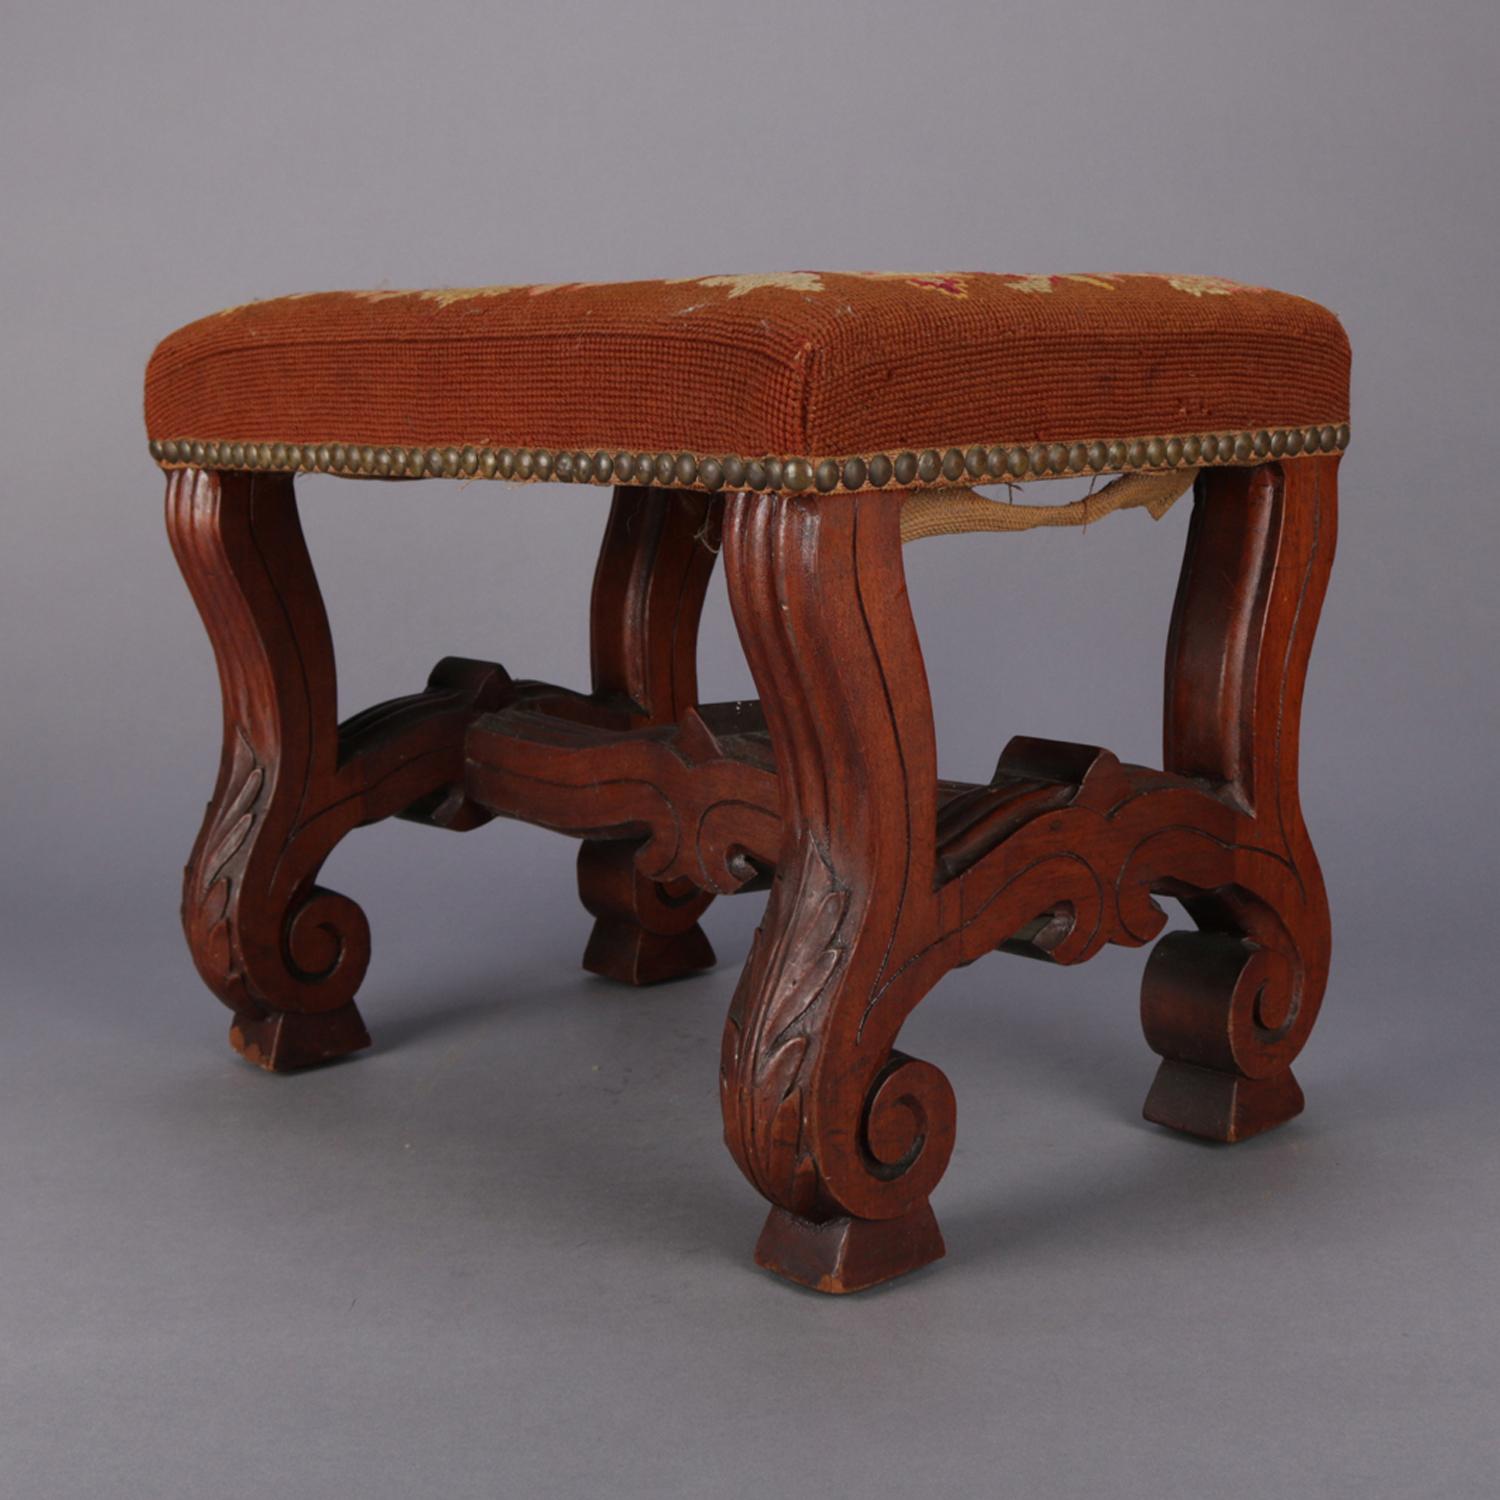 An antique Continental footstool having walnut base in trestle form with incised banding and carved acanthus scroll feet supporting tapestry needlepoint cushion with bird and foliate design, circa 1850

Measures: 12